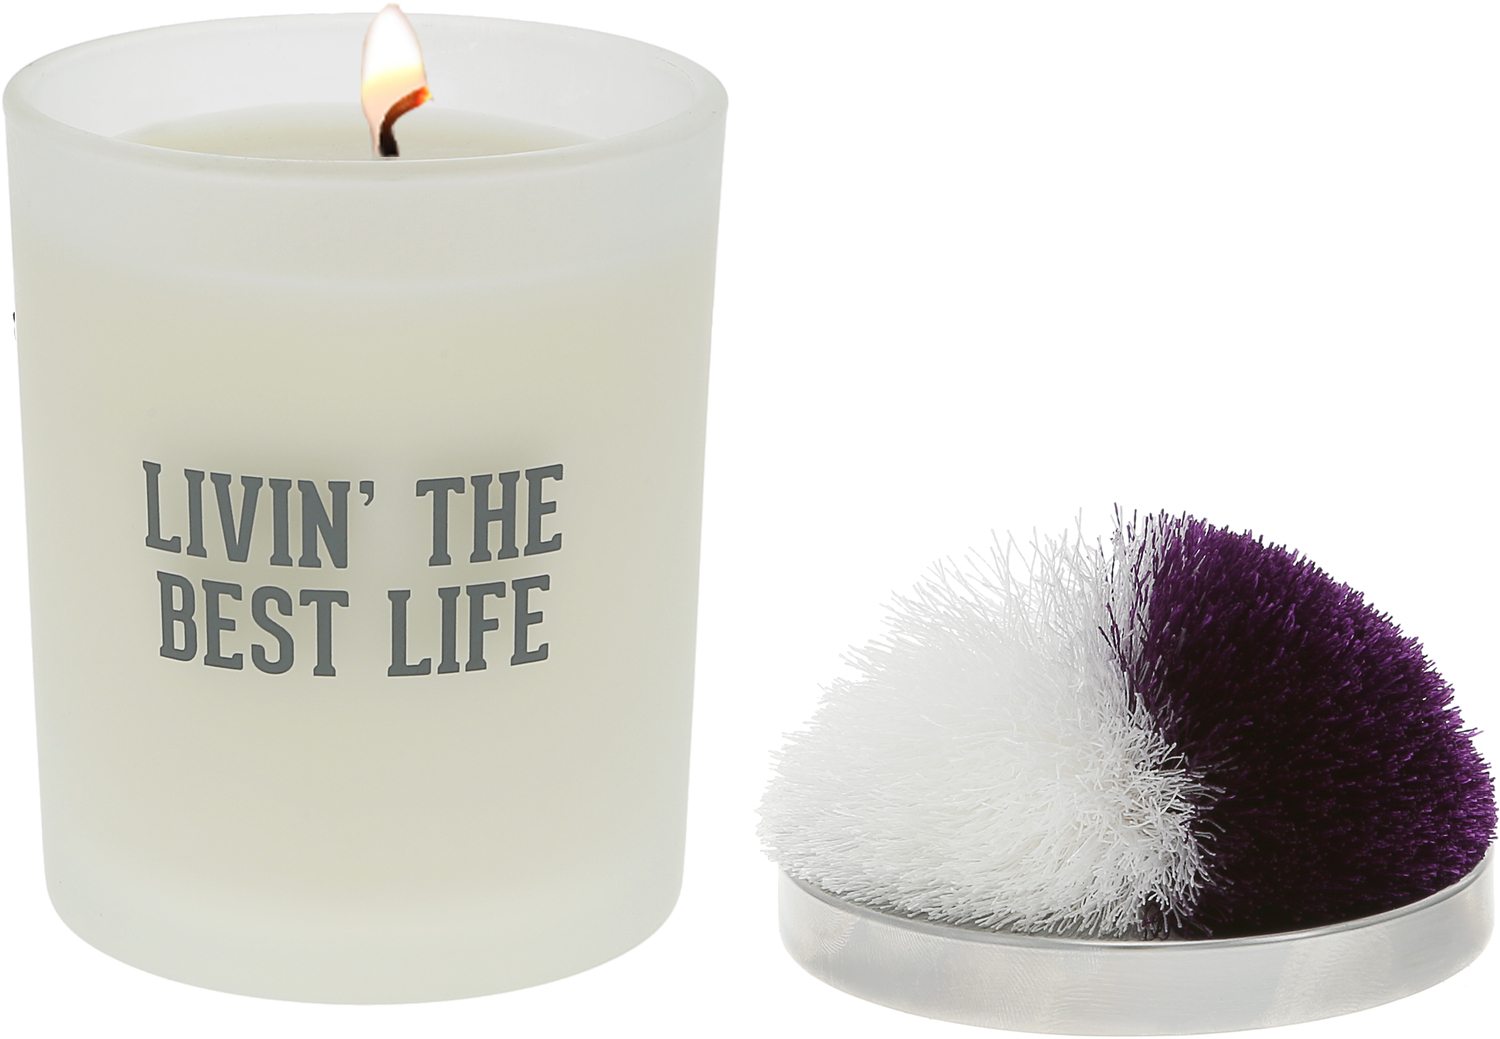 Best Life - Purple & White by Repre-Scent - Best Life - Purple & White - 5.5 oz - 100% Soy Wax Candle with Pom Pom Lid
Scent: Tranquility